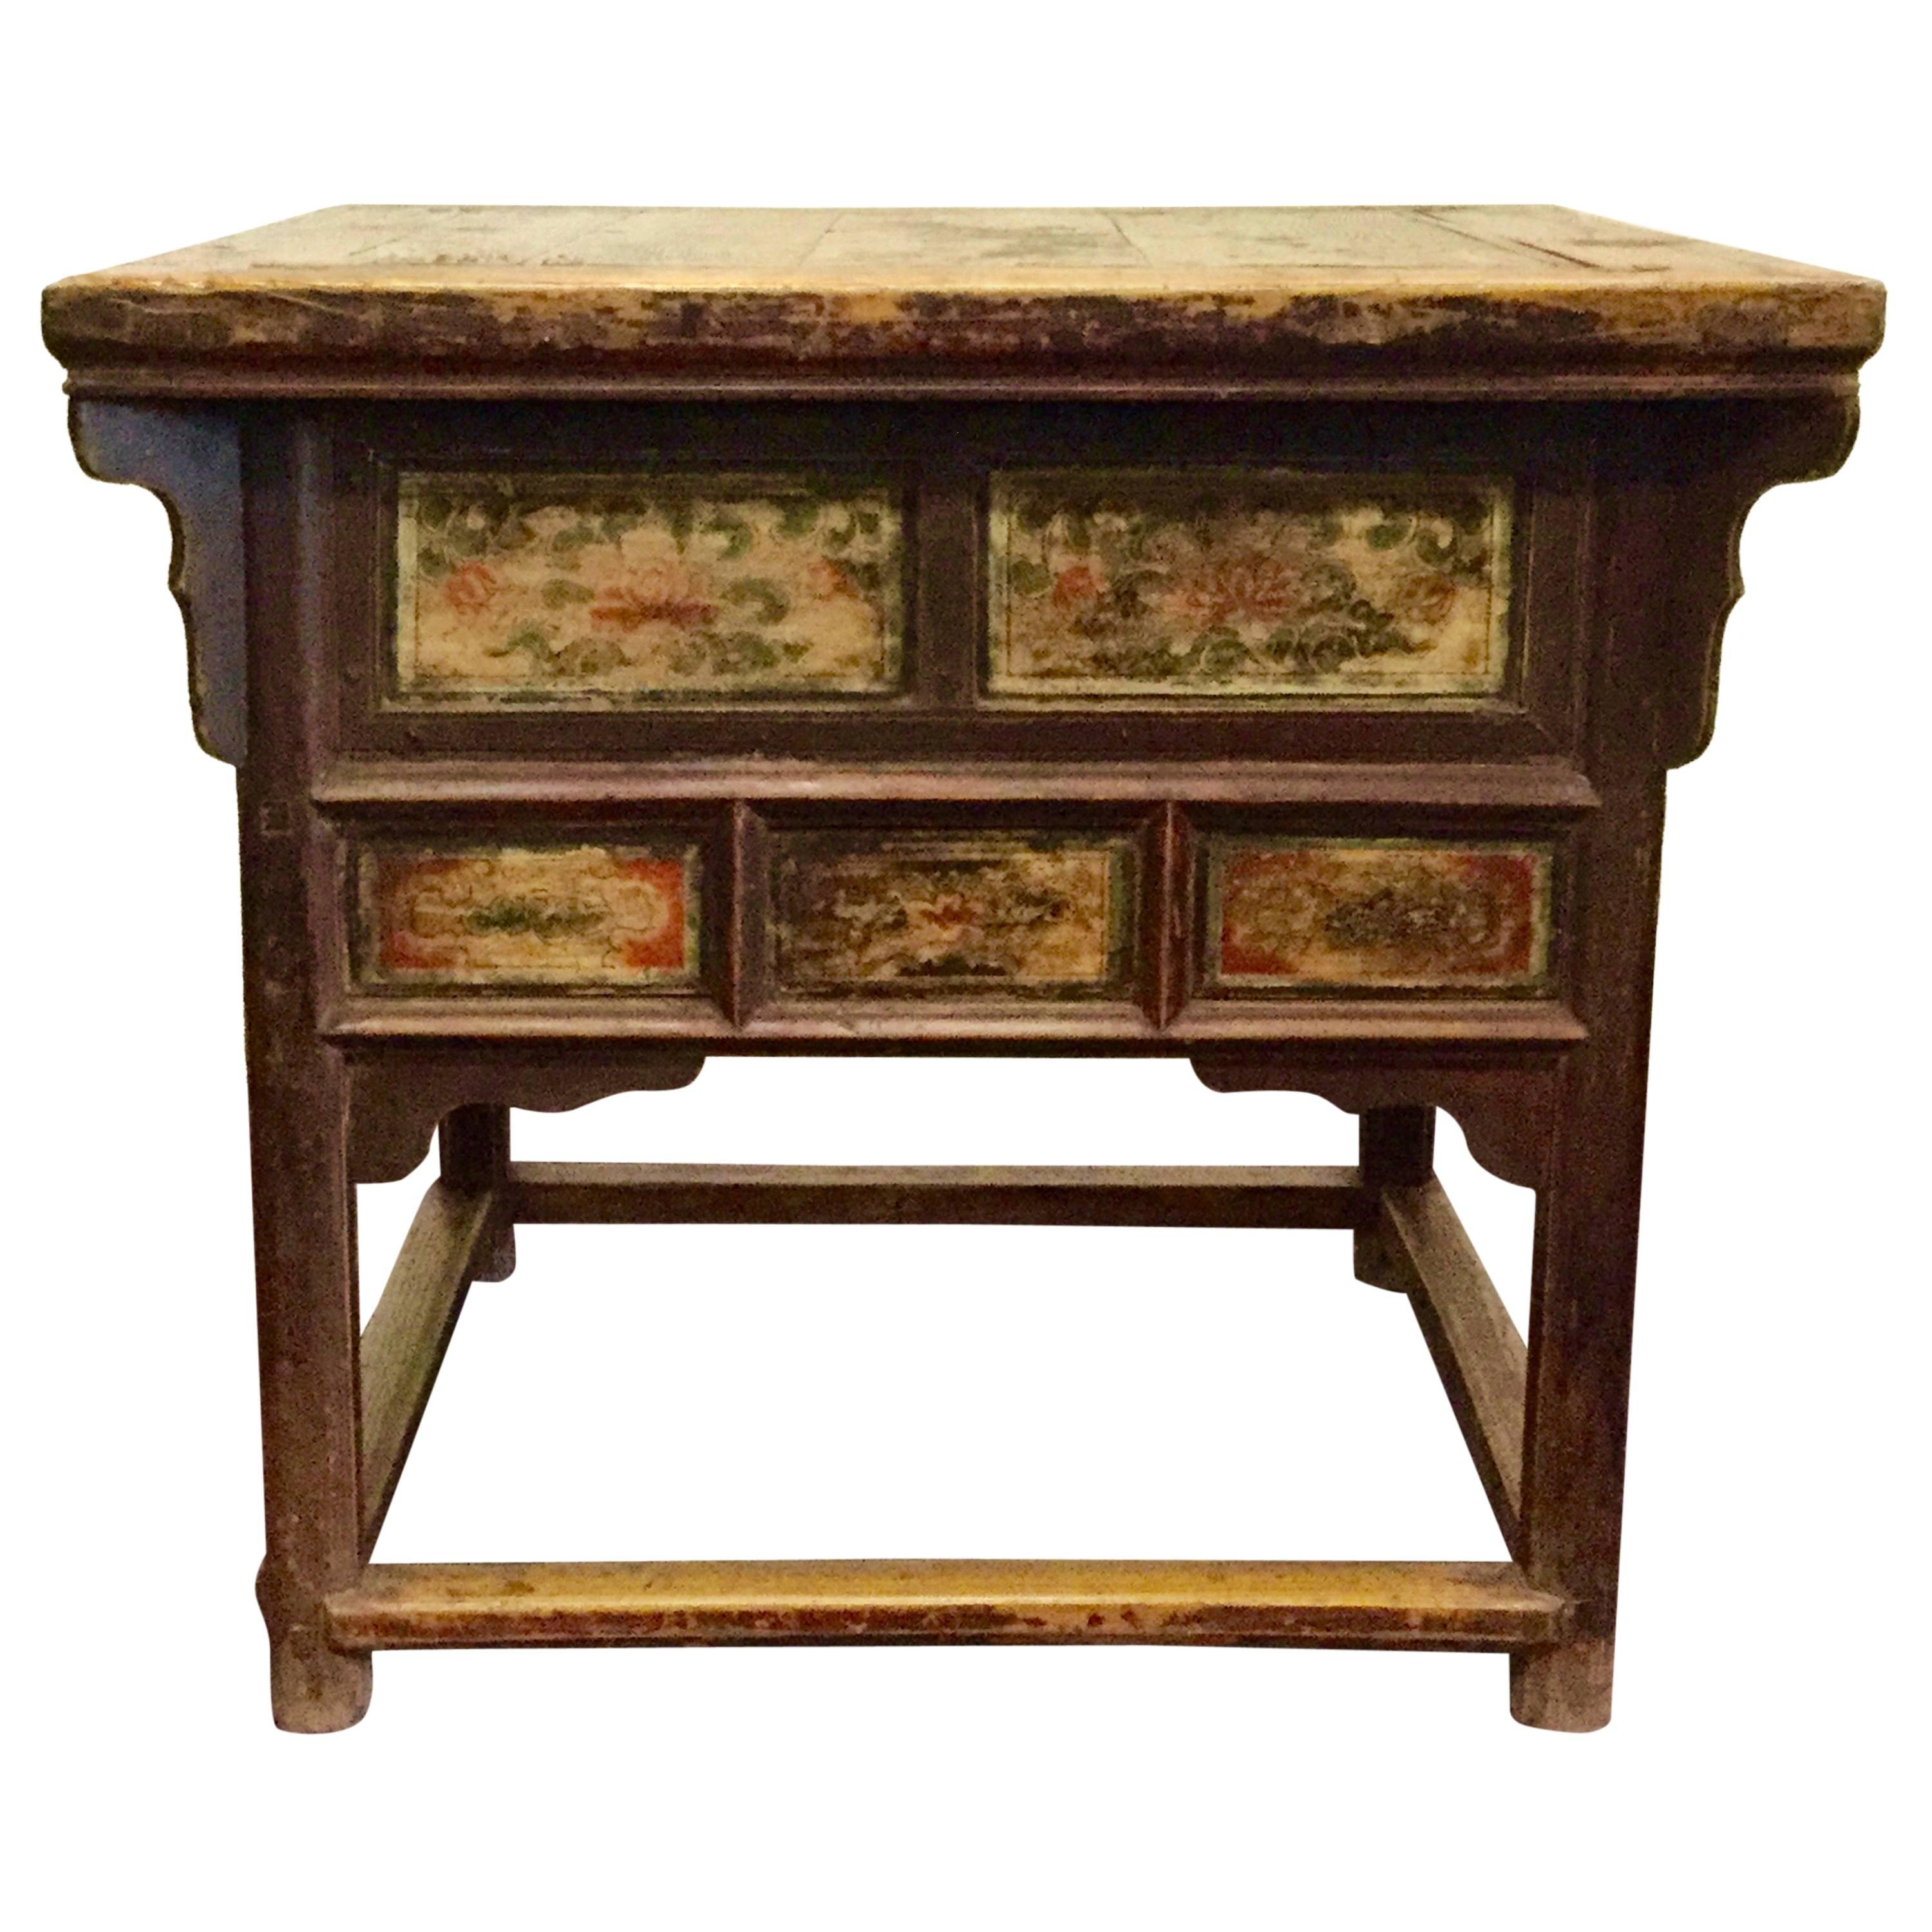 19th Century Chinese Square Kitchen Table, Walnut, Hand-Painted, Lotus Motif For Sale